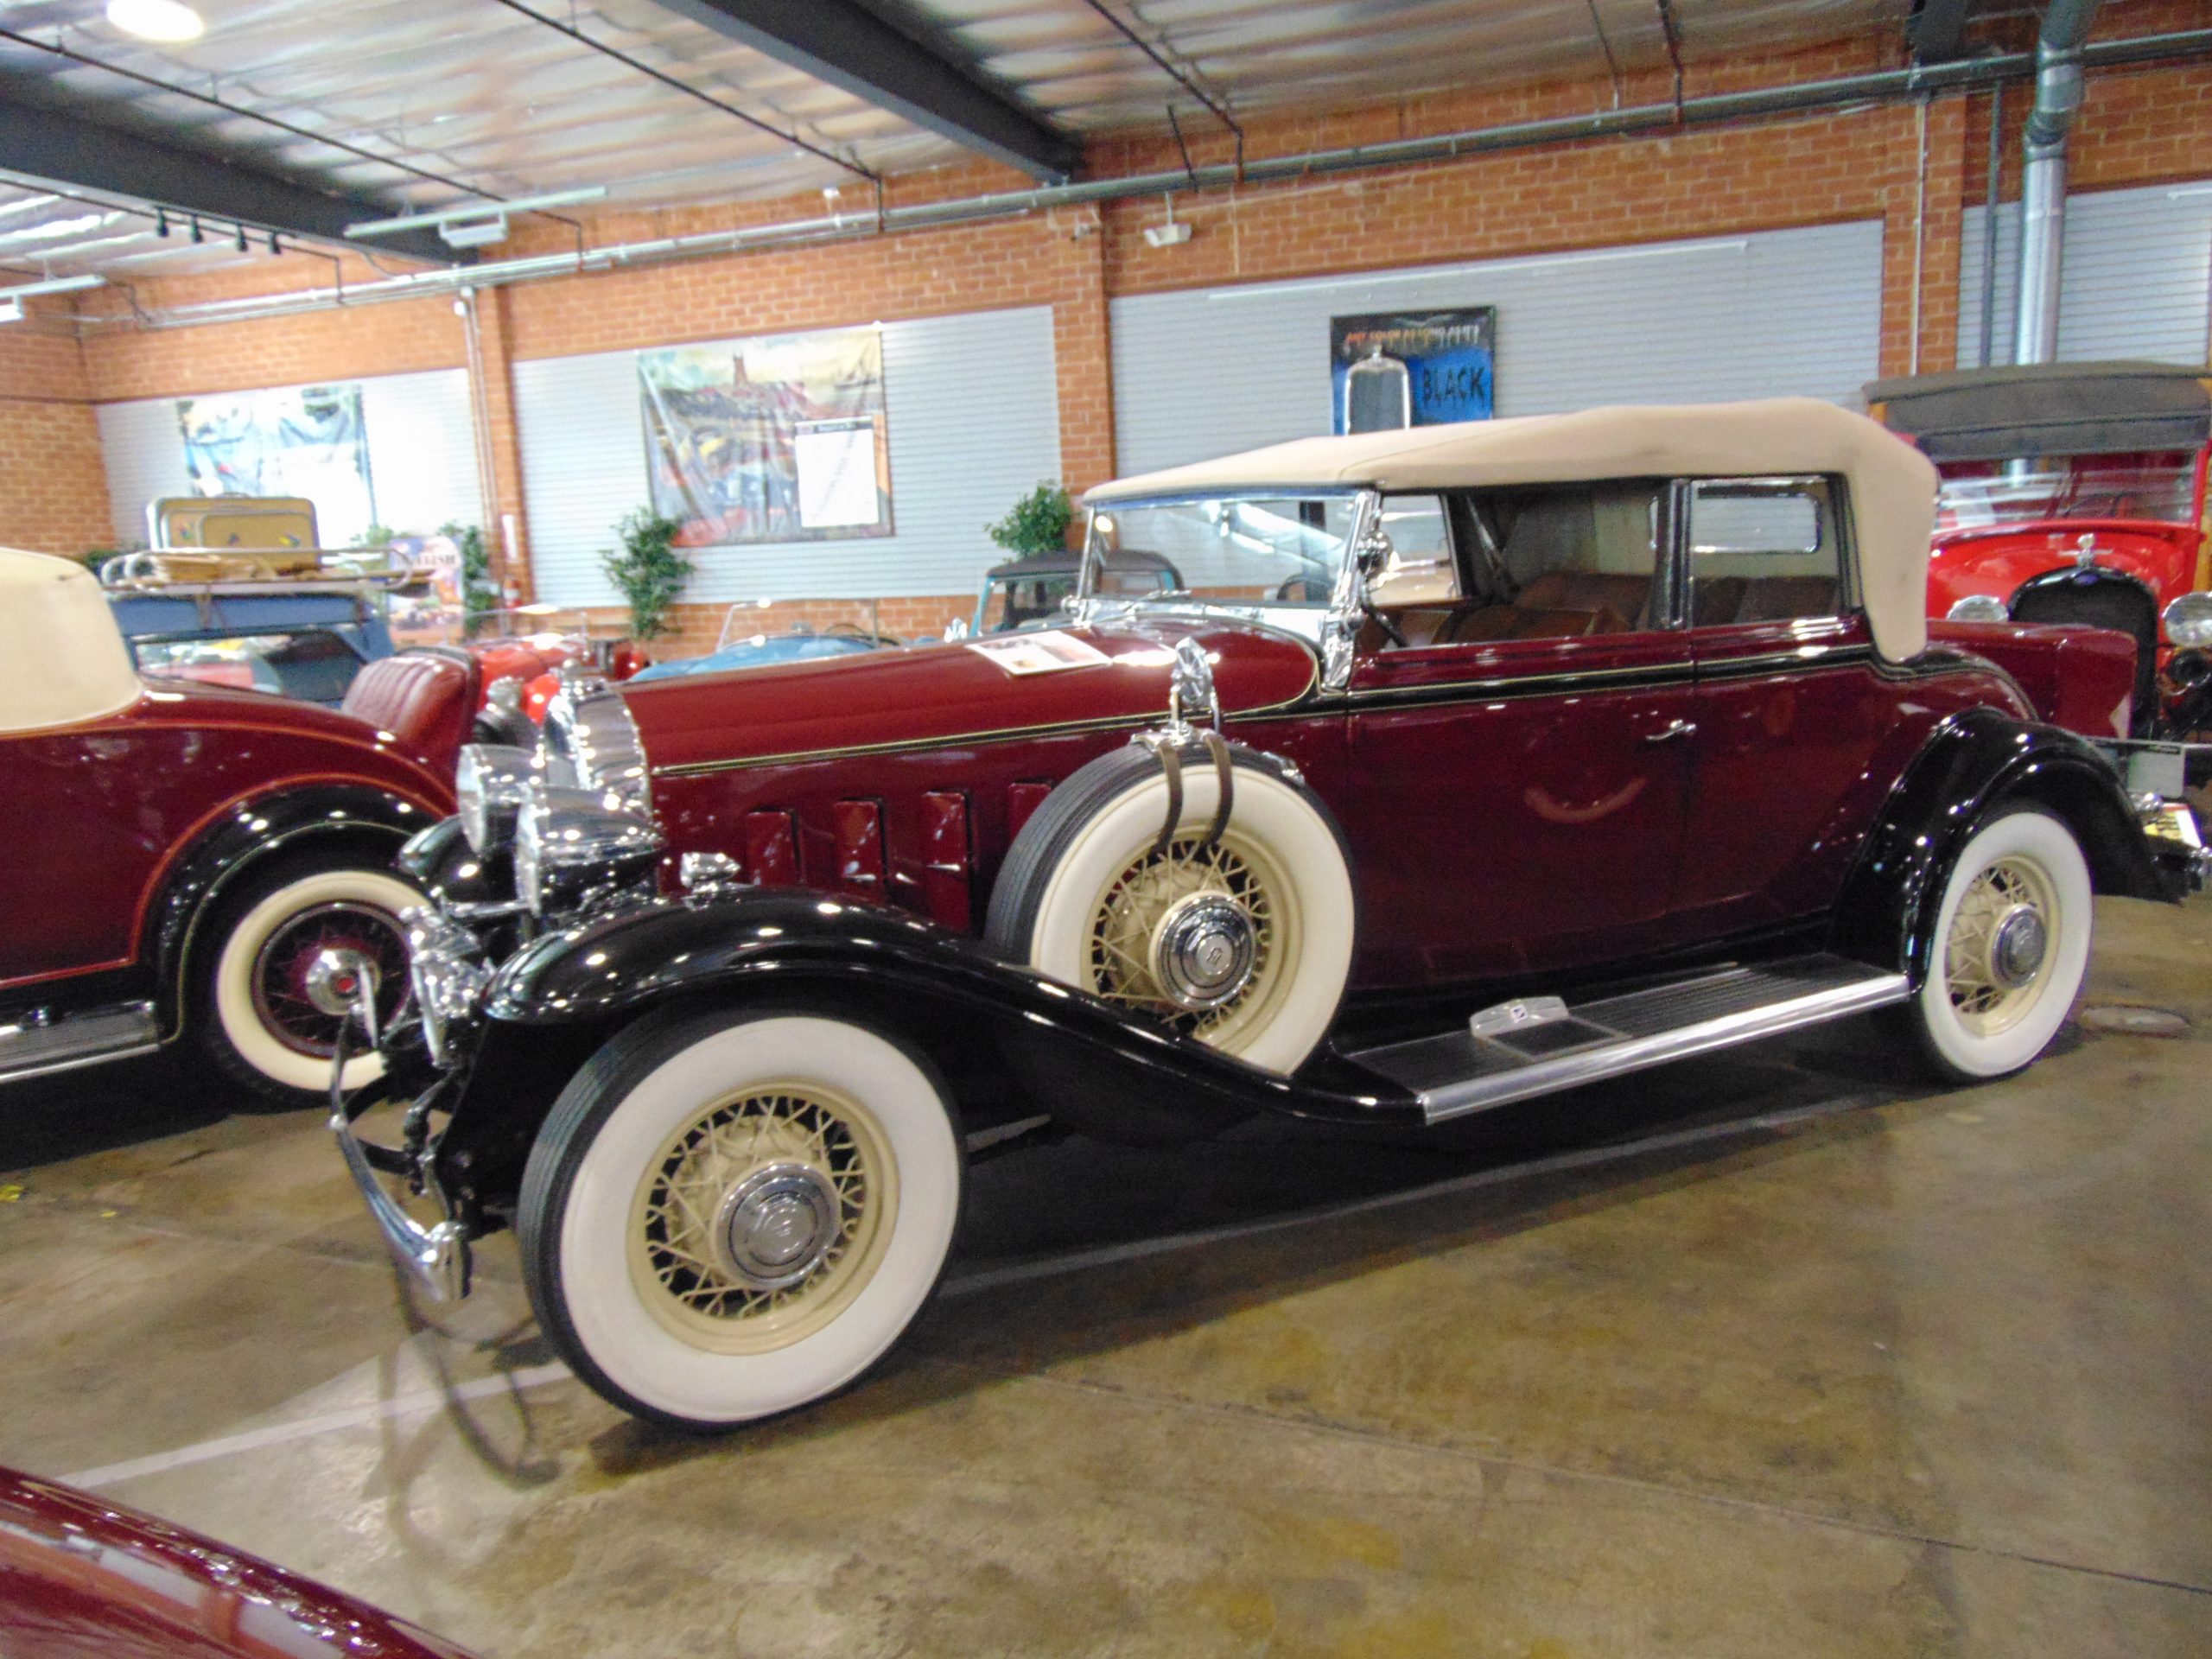 1932 Buick Victoria Convertible for rent